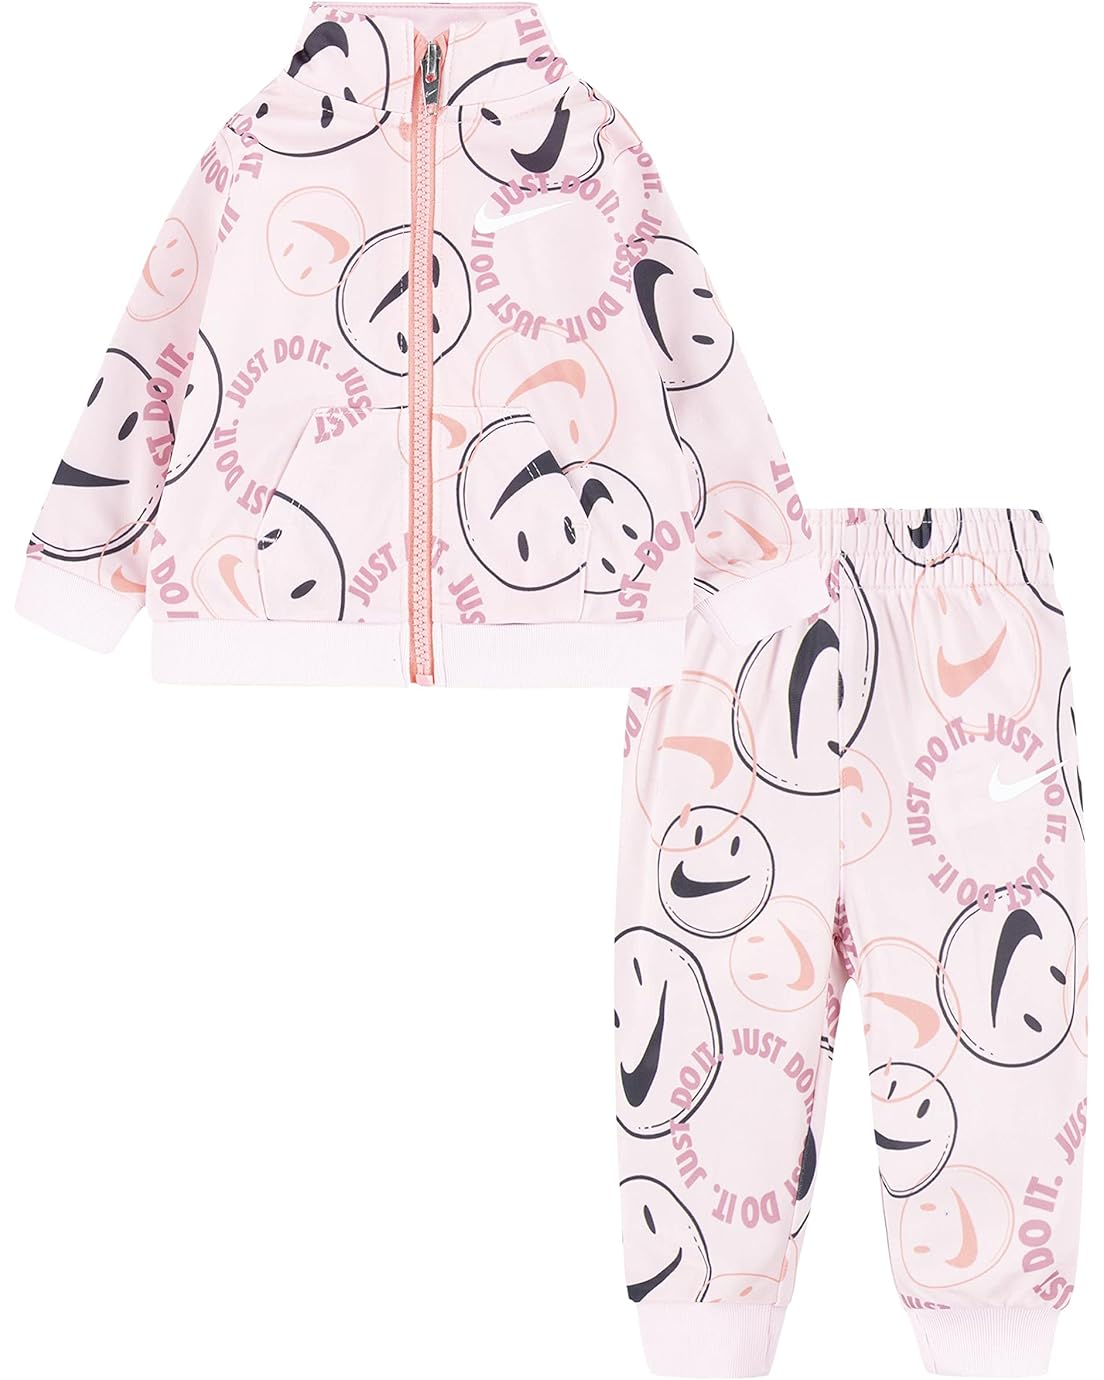 Nike Kids All Over Print Tricot Set (Infant)